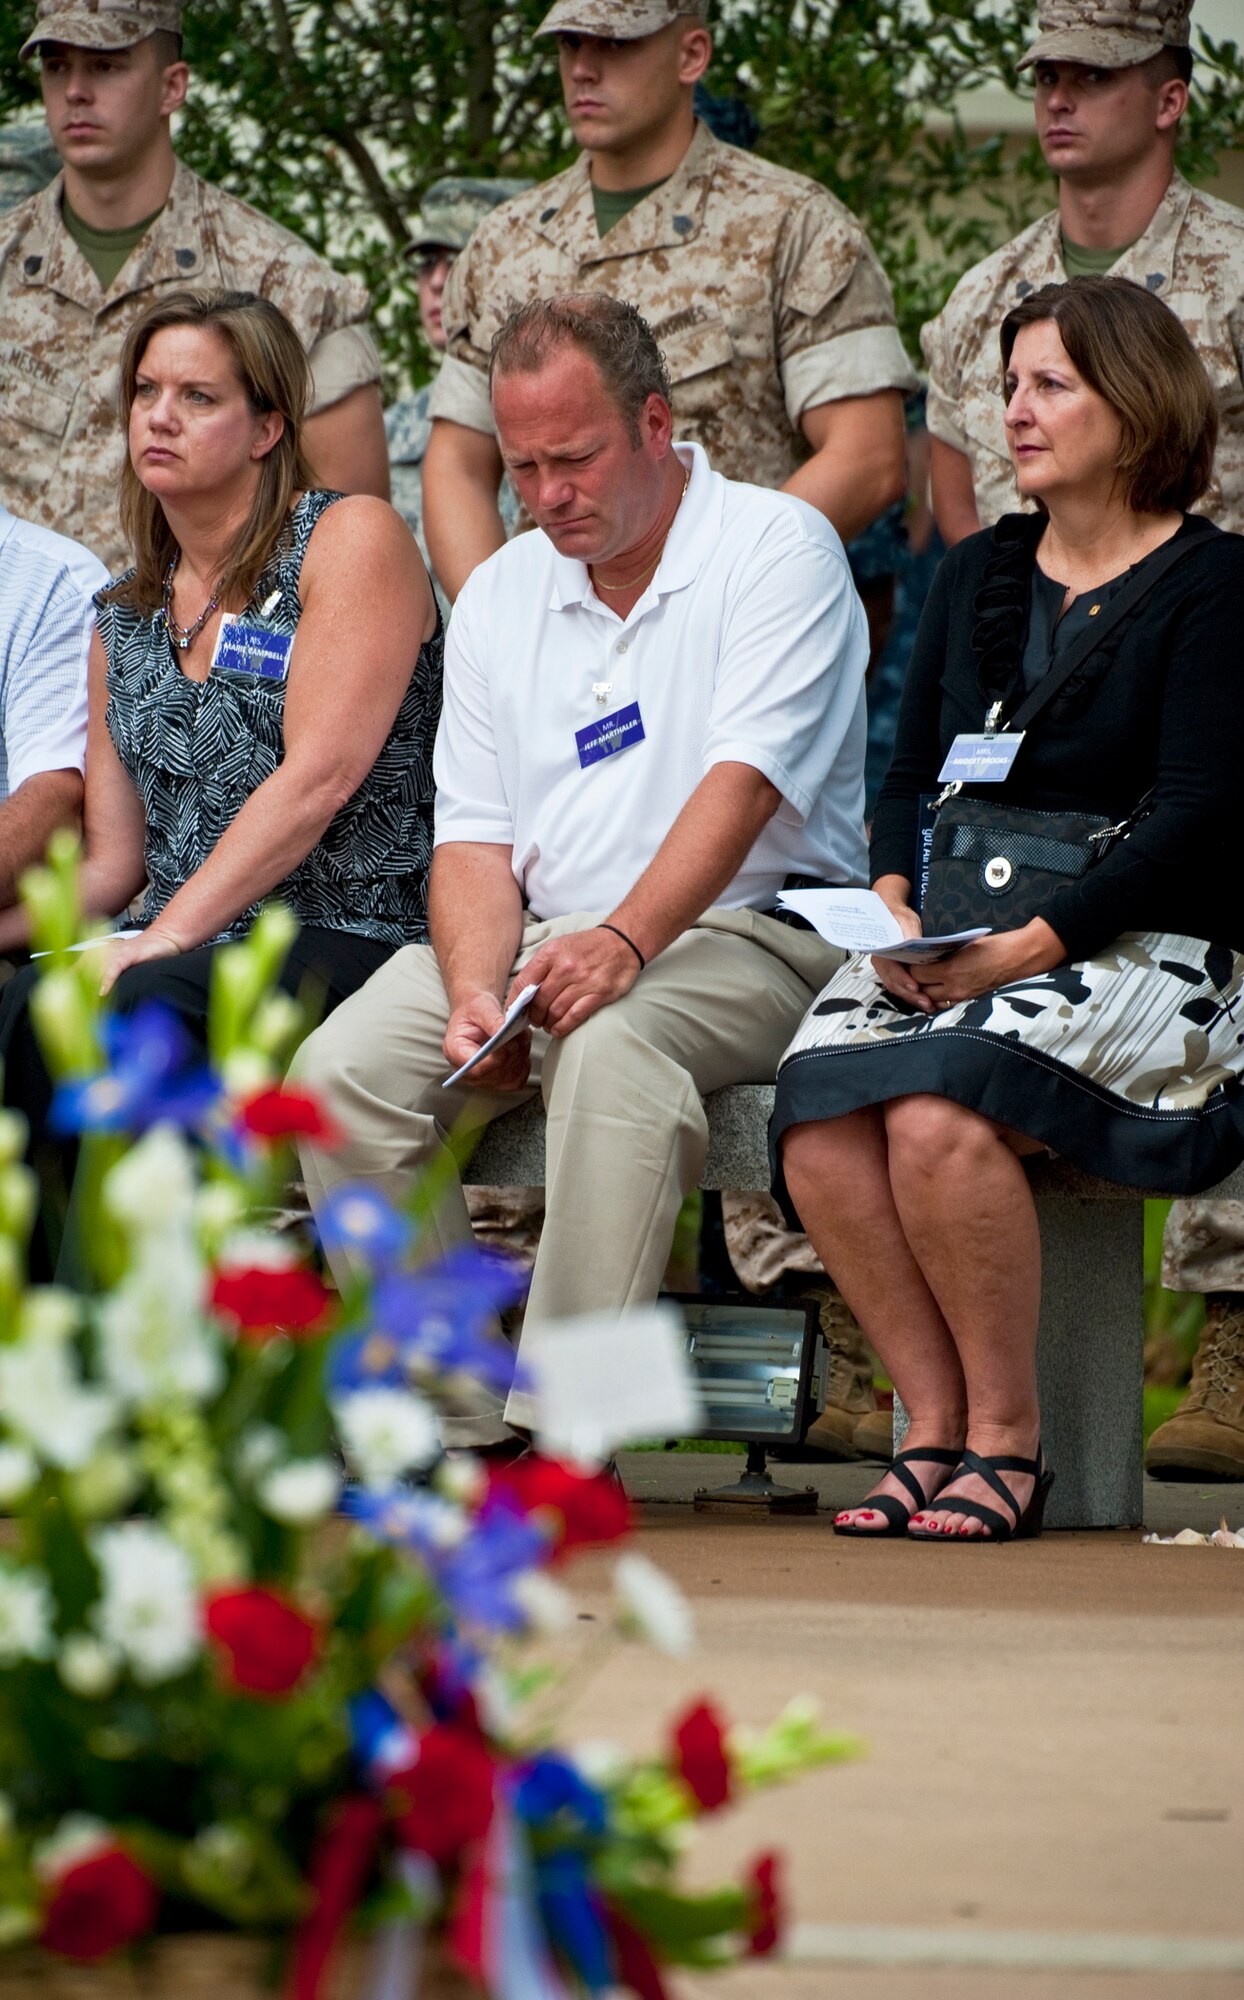 Family members of victims of the Khobar Towers bombing observe a moment of silence at the Khobar Towers memorial ceremony June 24, 2011, at Eglin Air Force Base, Fla. June 25 marks the 15th anniversary of the bombing that killed 19 service members including 12 33rd FW Airmen. (U.S. Air Force photo/Samuel King Jr.)